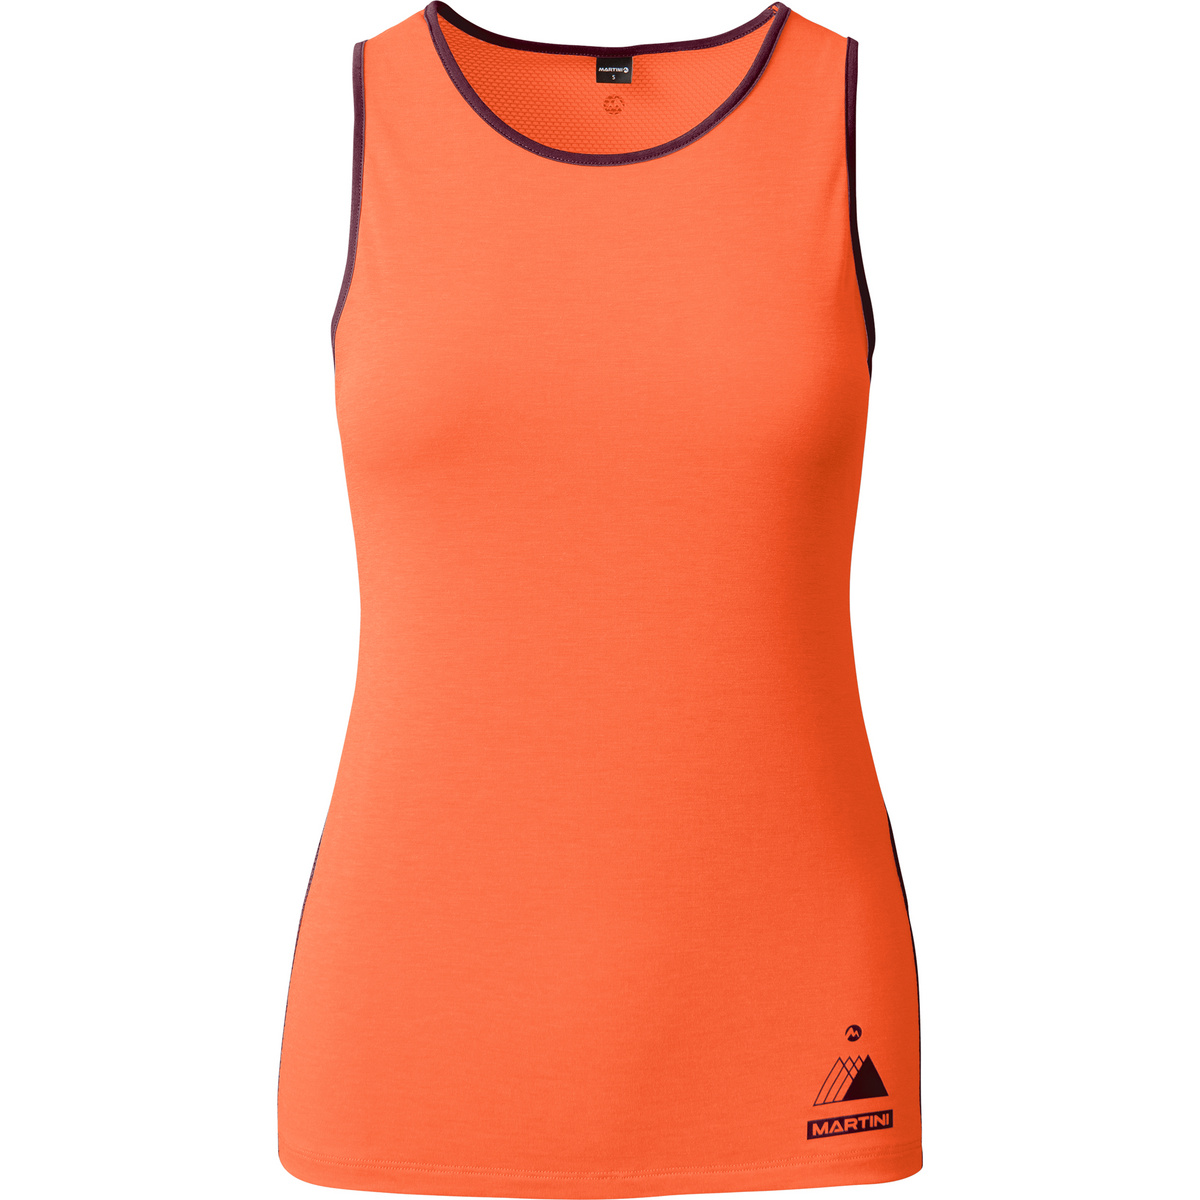 Image of Martini Sportswear Donna Top Pacemaker